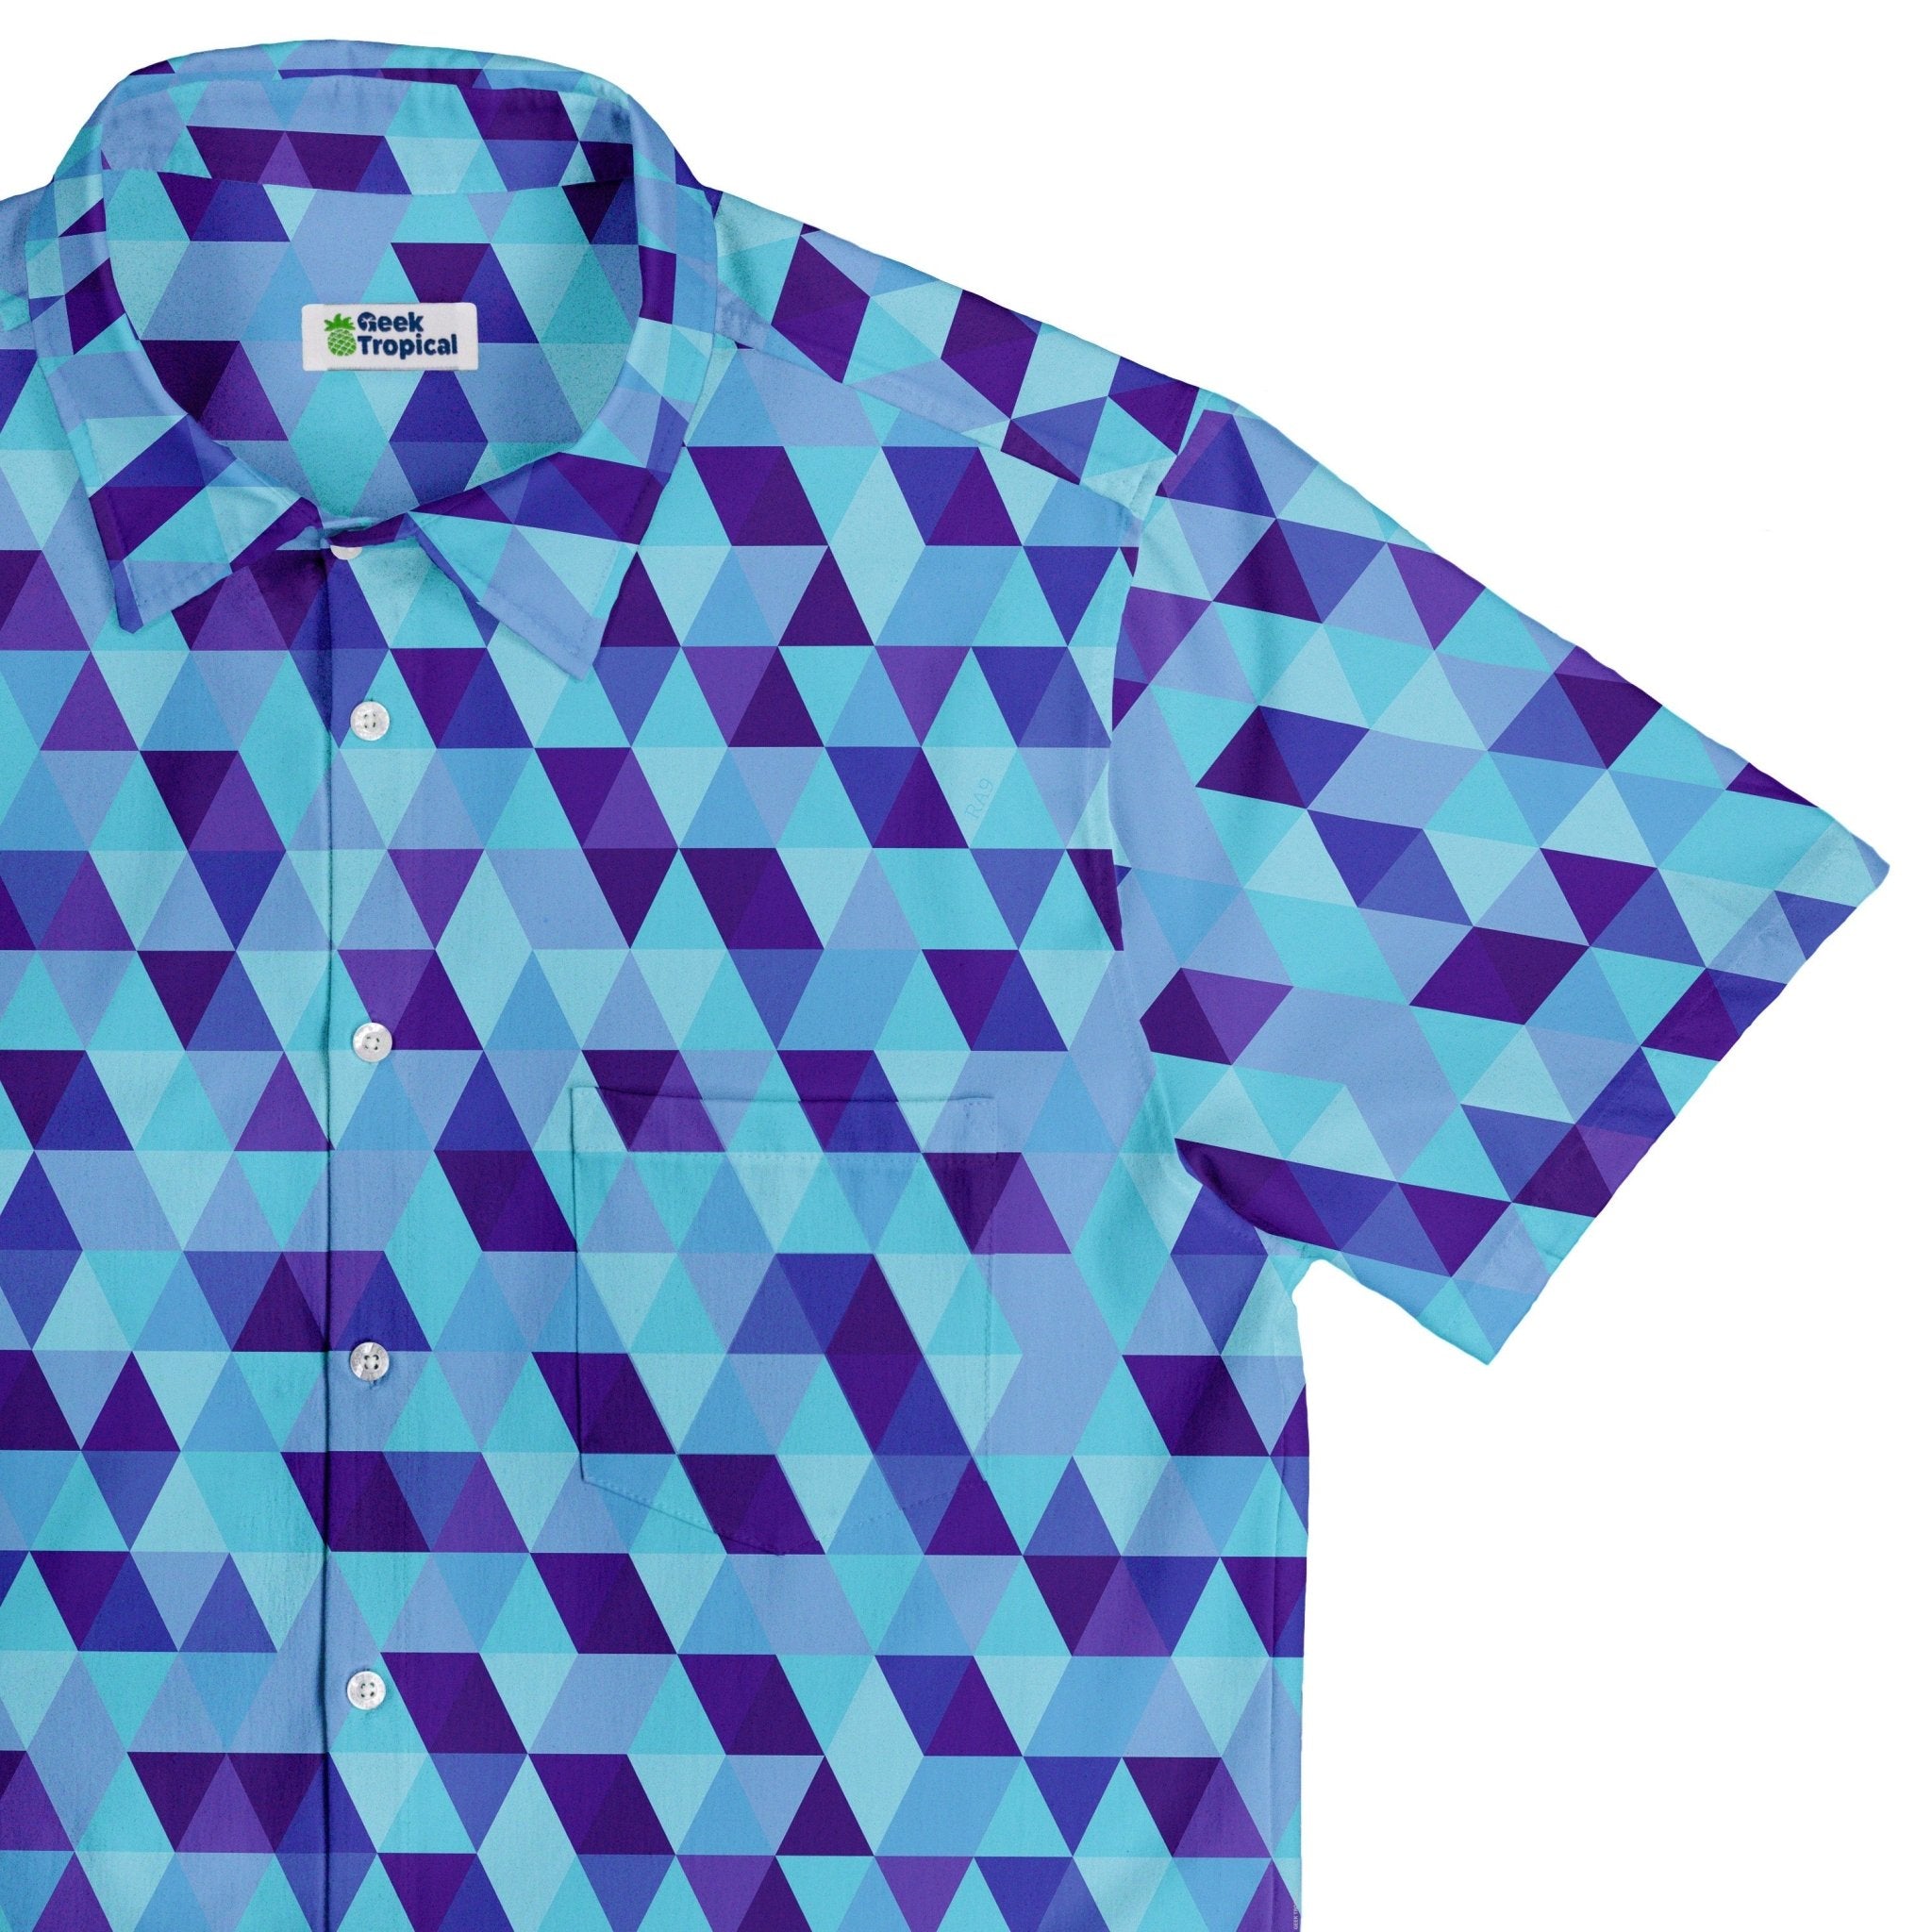 Deviant Polygons Button Up Shirt - adult sizing - Design by Claire Murphy - video game arcade print